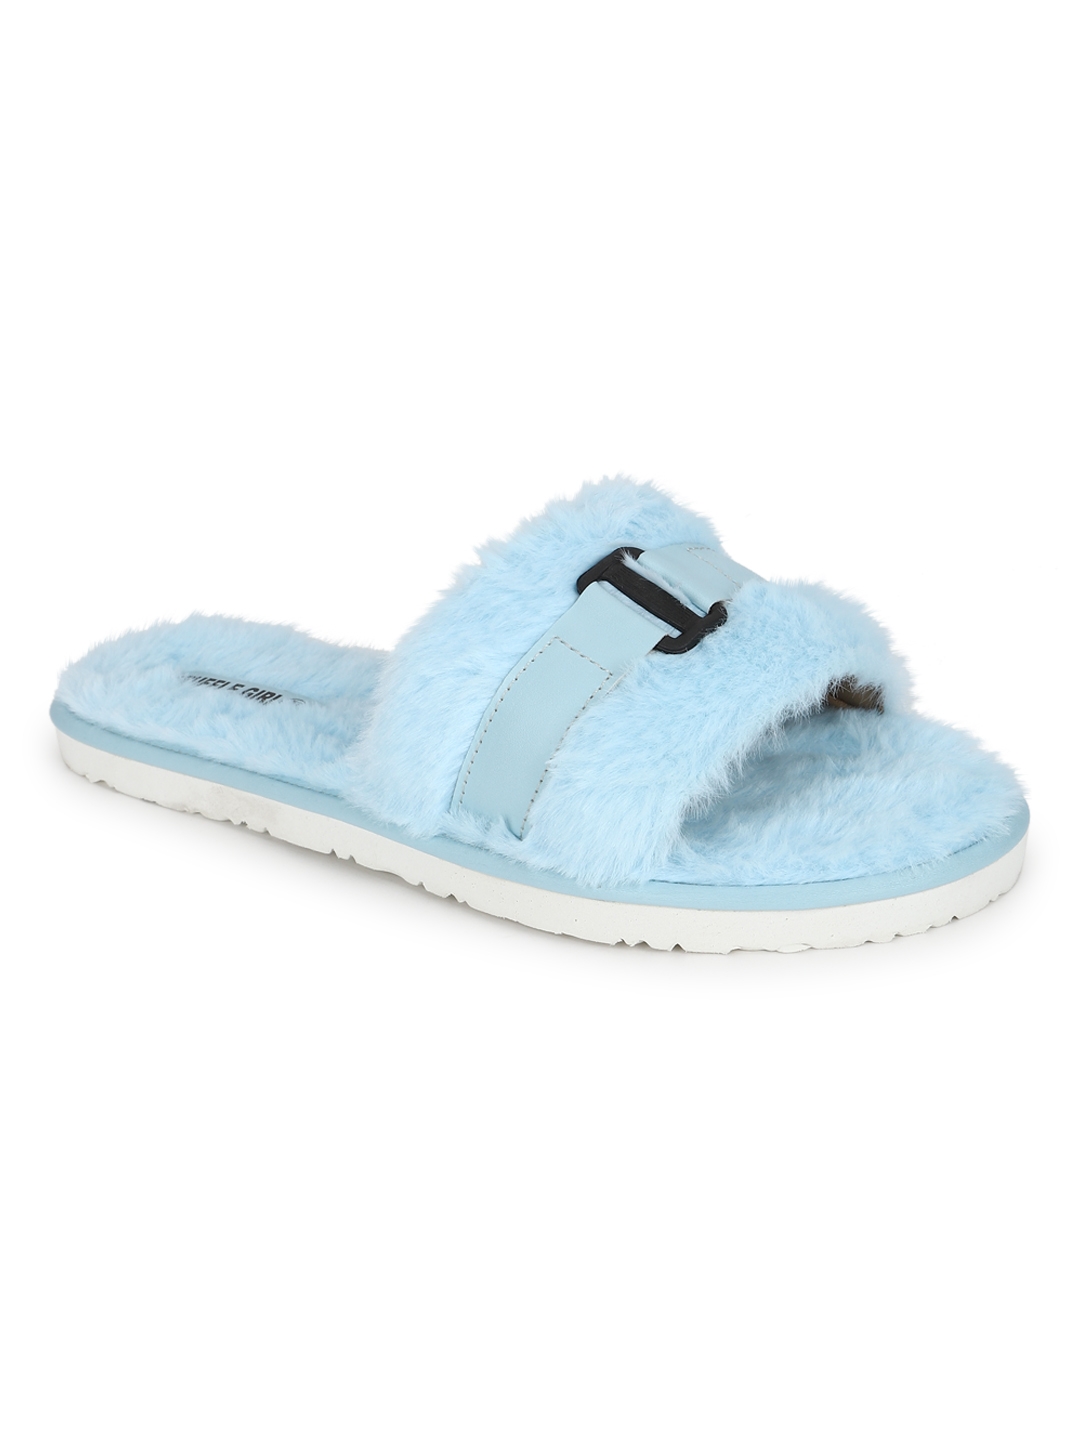 Blue Fuzzy Fur Slip Ons With Buckle